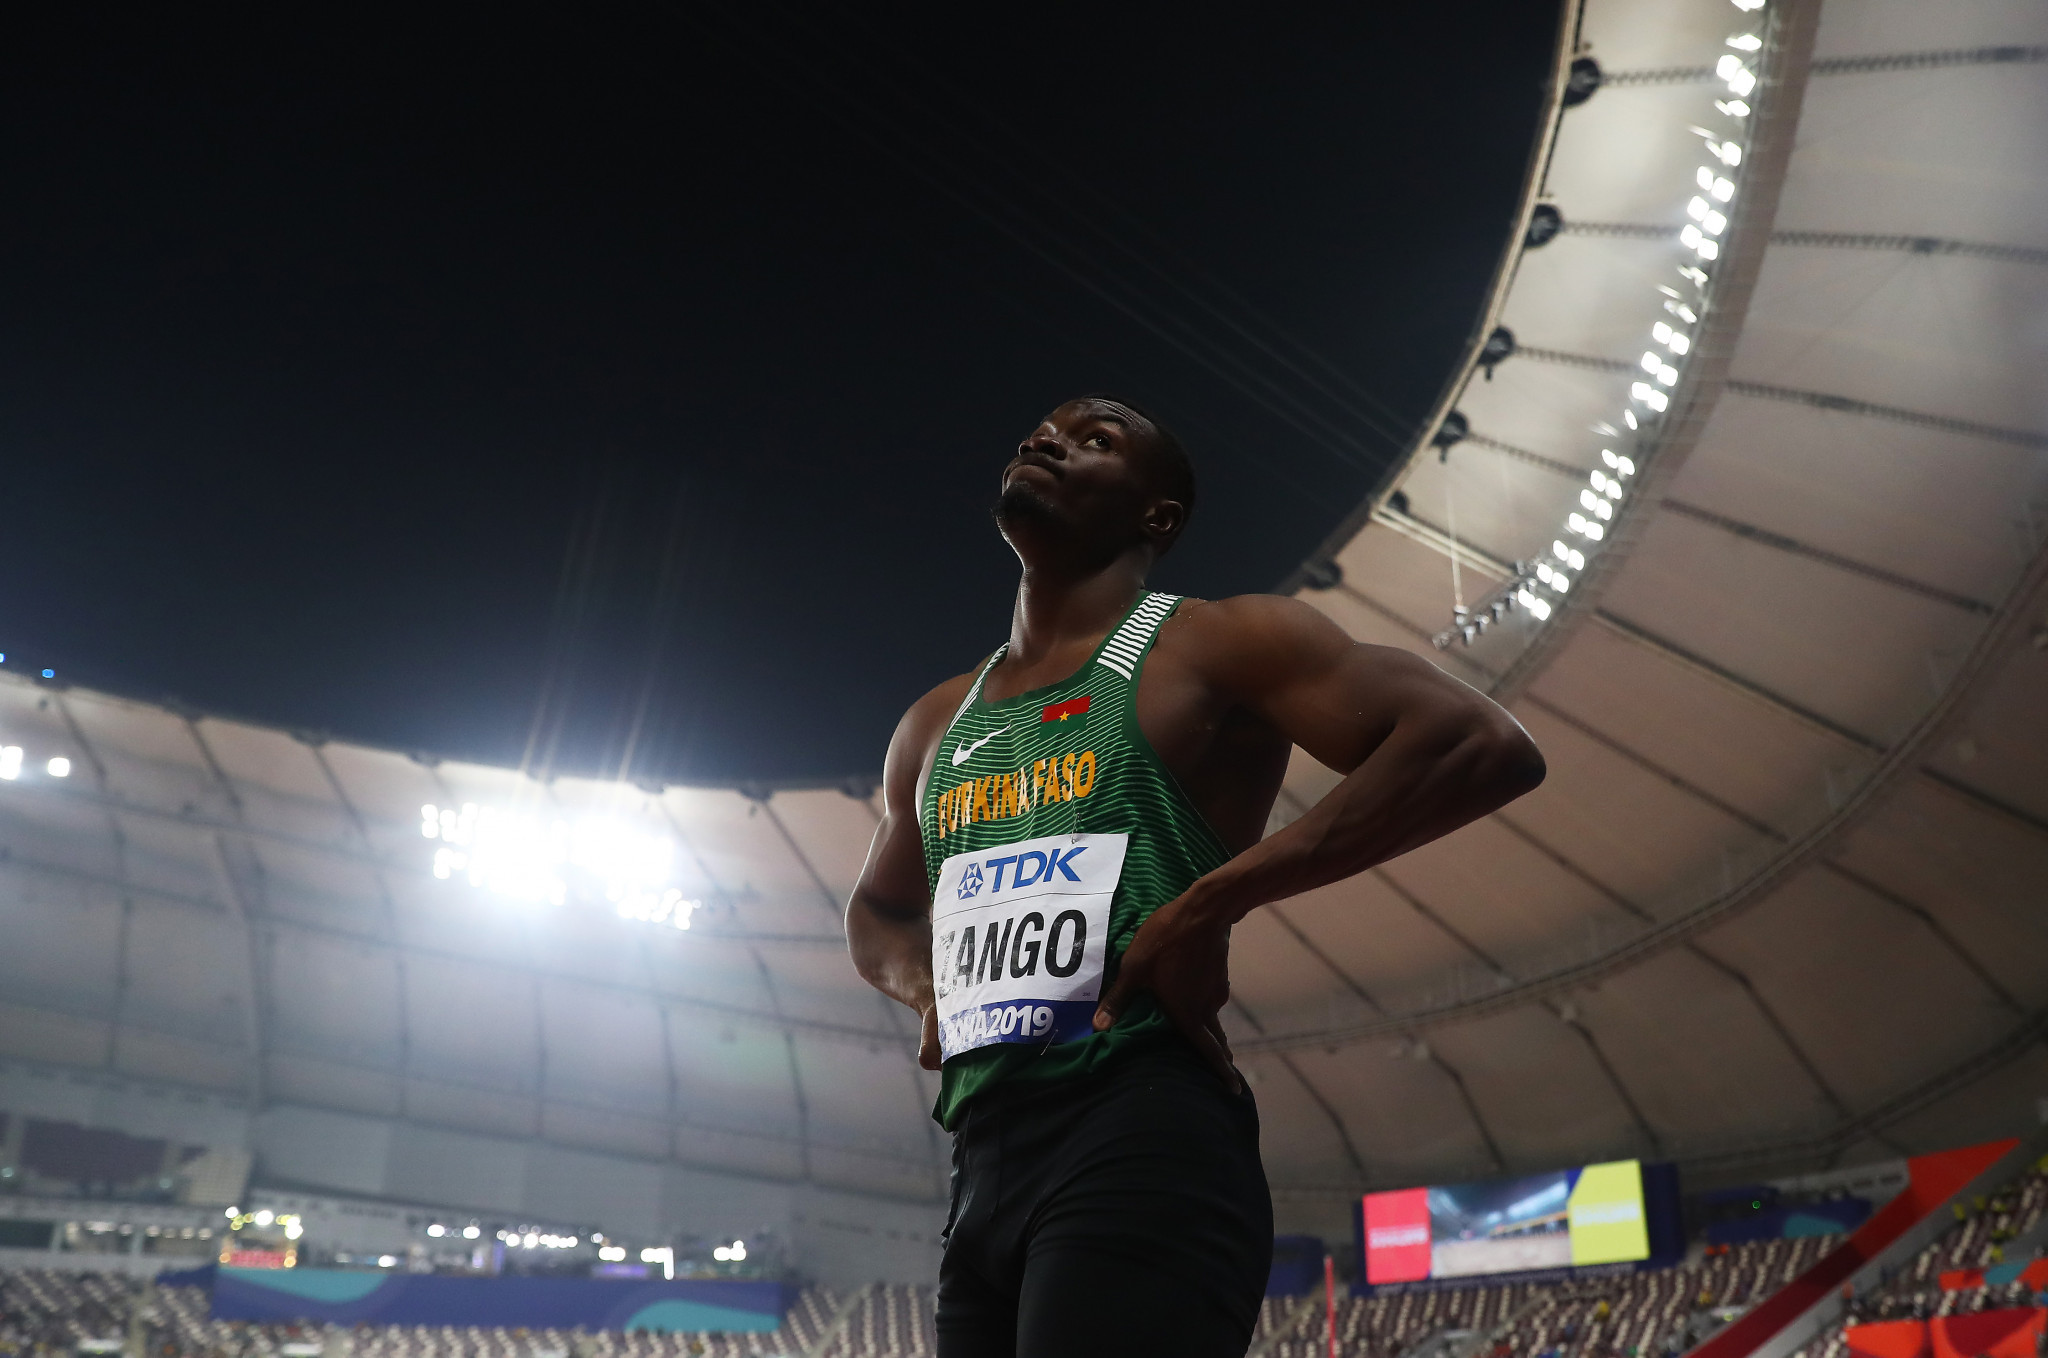 Triple jumpers eye world records at World Athletics Indoor Tour in Madrid